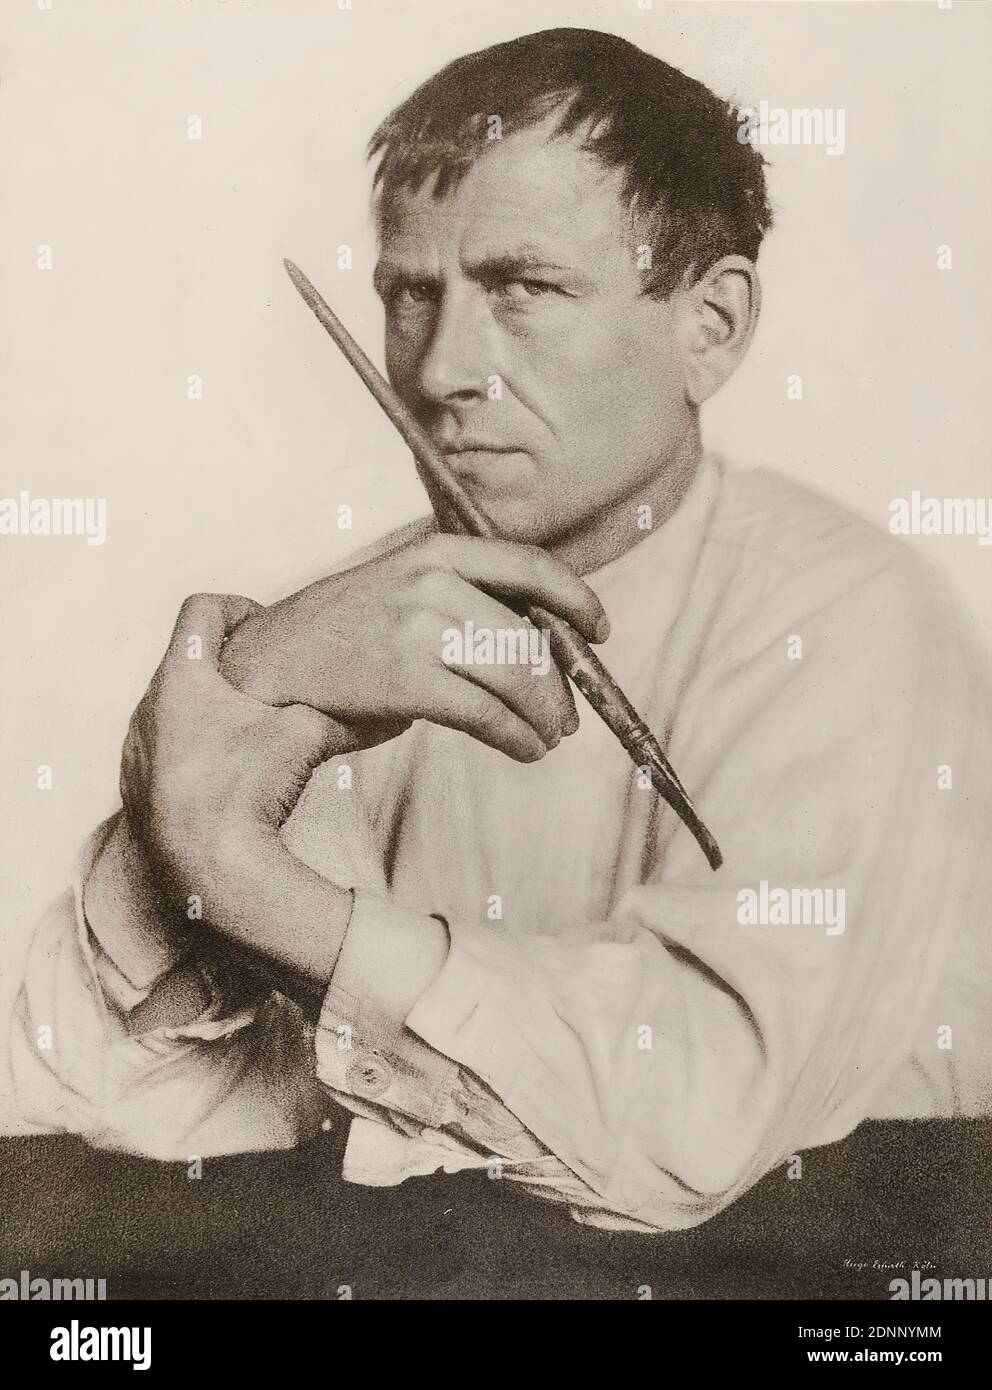 Hugo Erfurth, Otto Dix, from the album Ausstellung Hugo Erfurth - Bildnisse aus dem XX. Jahrhundert, Konstanz 1949, Staatliche Landesbildstelle Hamburg, collection on the history of photography, paper, oil print, image size: height: 29.6 cm; width: 22.7 cm, signed and inscribed, eingeritzt: Hugo Erfurth, Cologne, inscribed: Passepartout verso: upper left in lead: 38, lower right in lead: Repro-Nr, portrait photography, portrait, artist, painting, At the beginning of the 20th century, Hugo Erfurth was one of the most famous professional photographers in Germany, alongside Rudolph Dührkoop Stock Photo